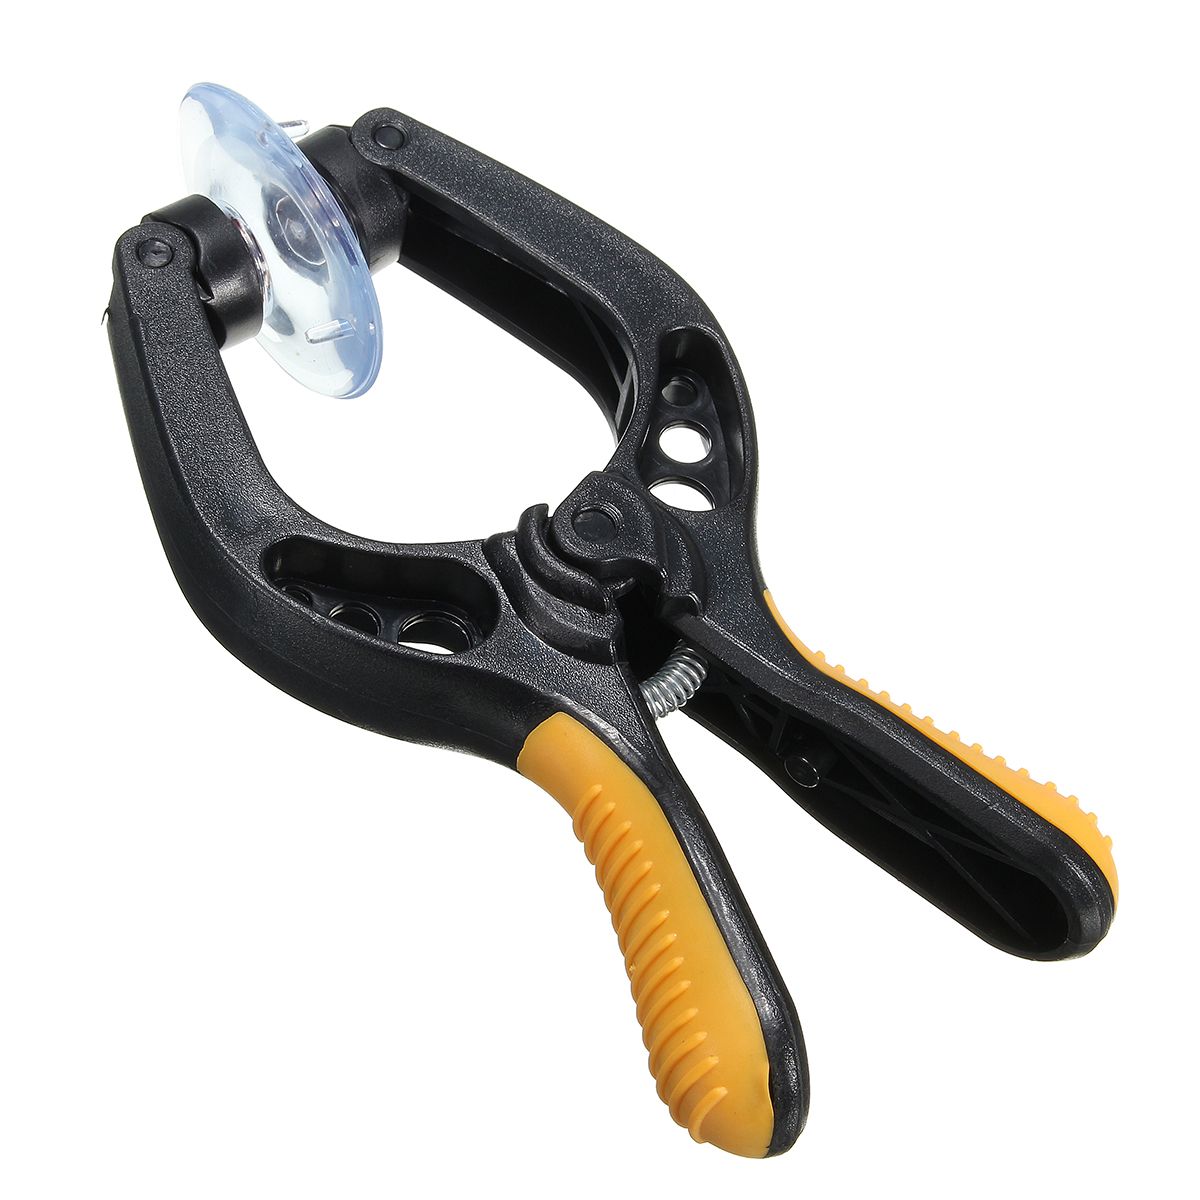 19-in-1-Phone-LCD-Screen-Opening-Tool-Plier-Suction-Cup-Pry-Spudger-Repair-Kit-Set-1114872